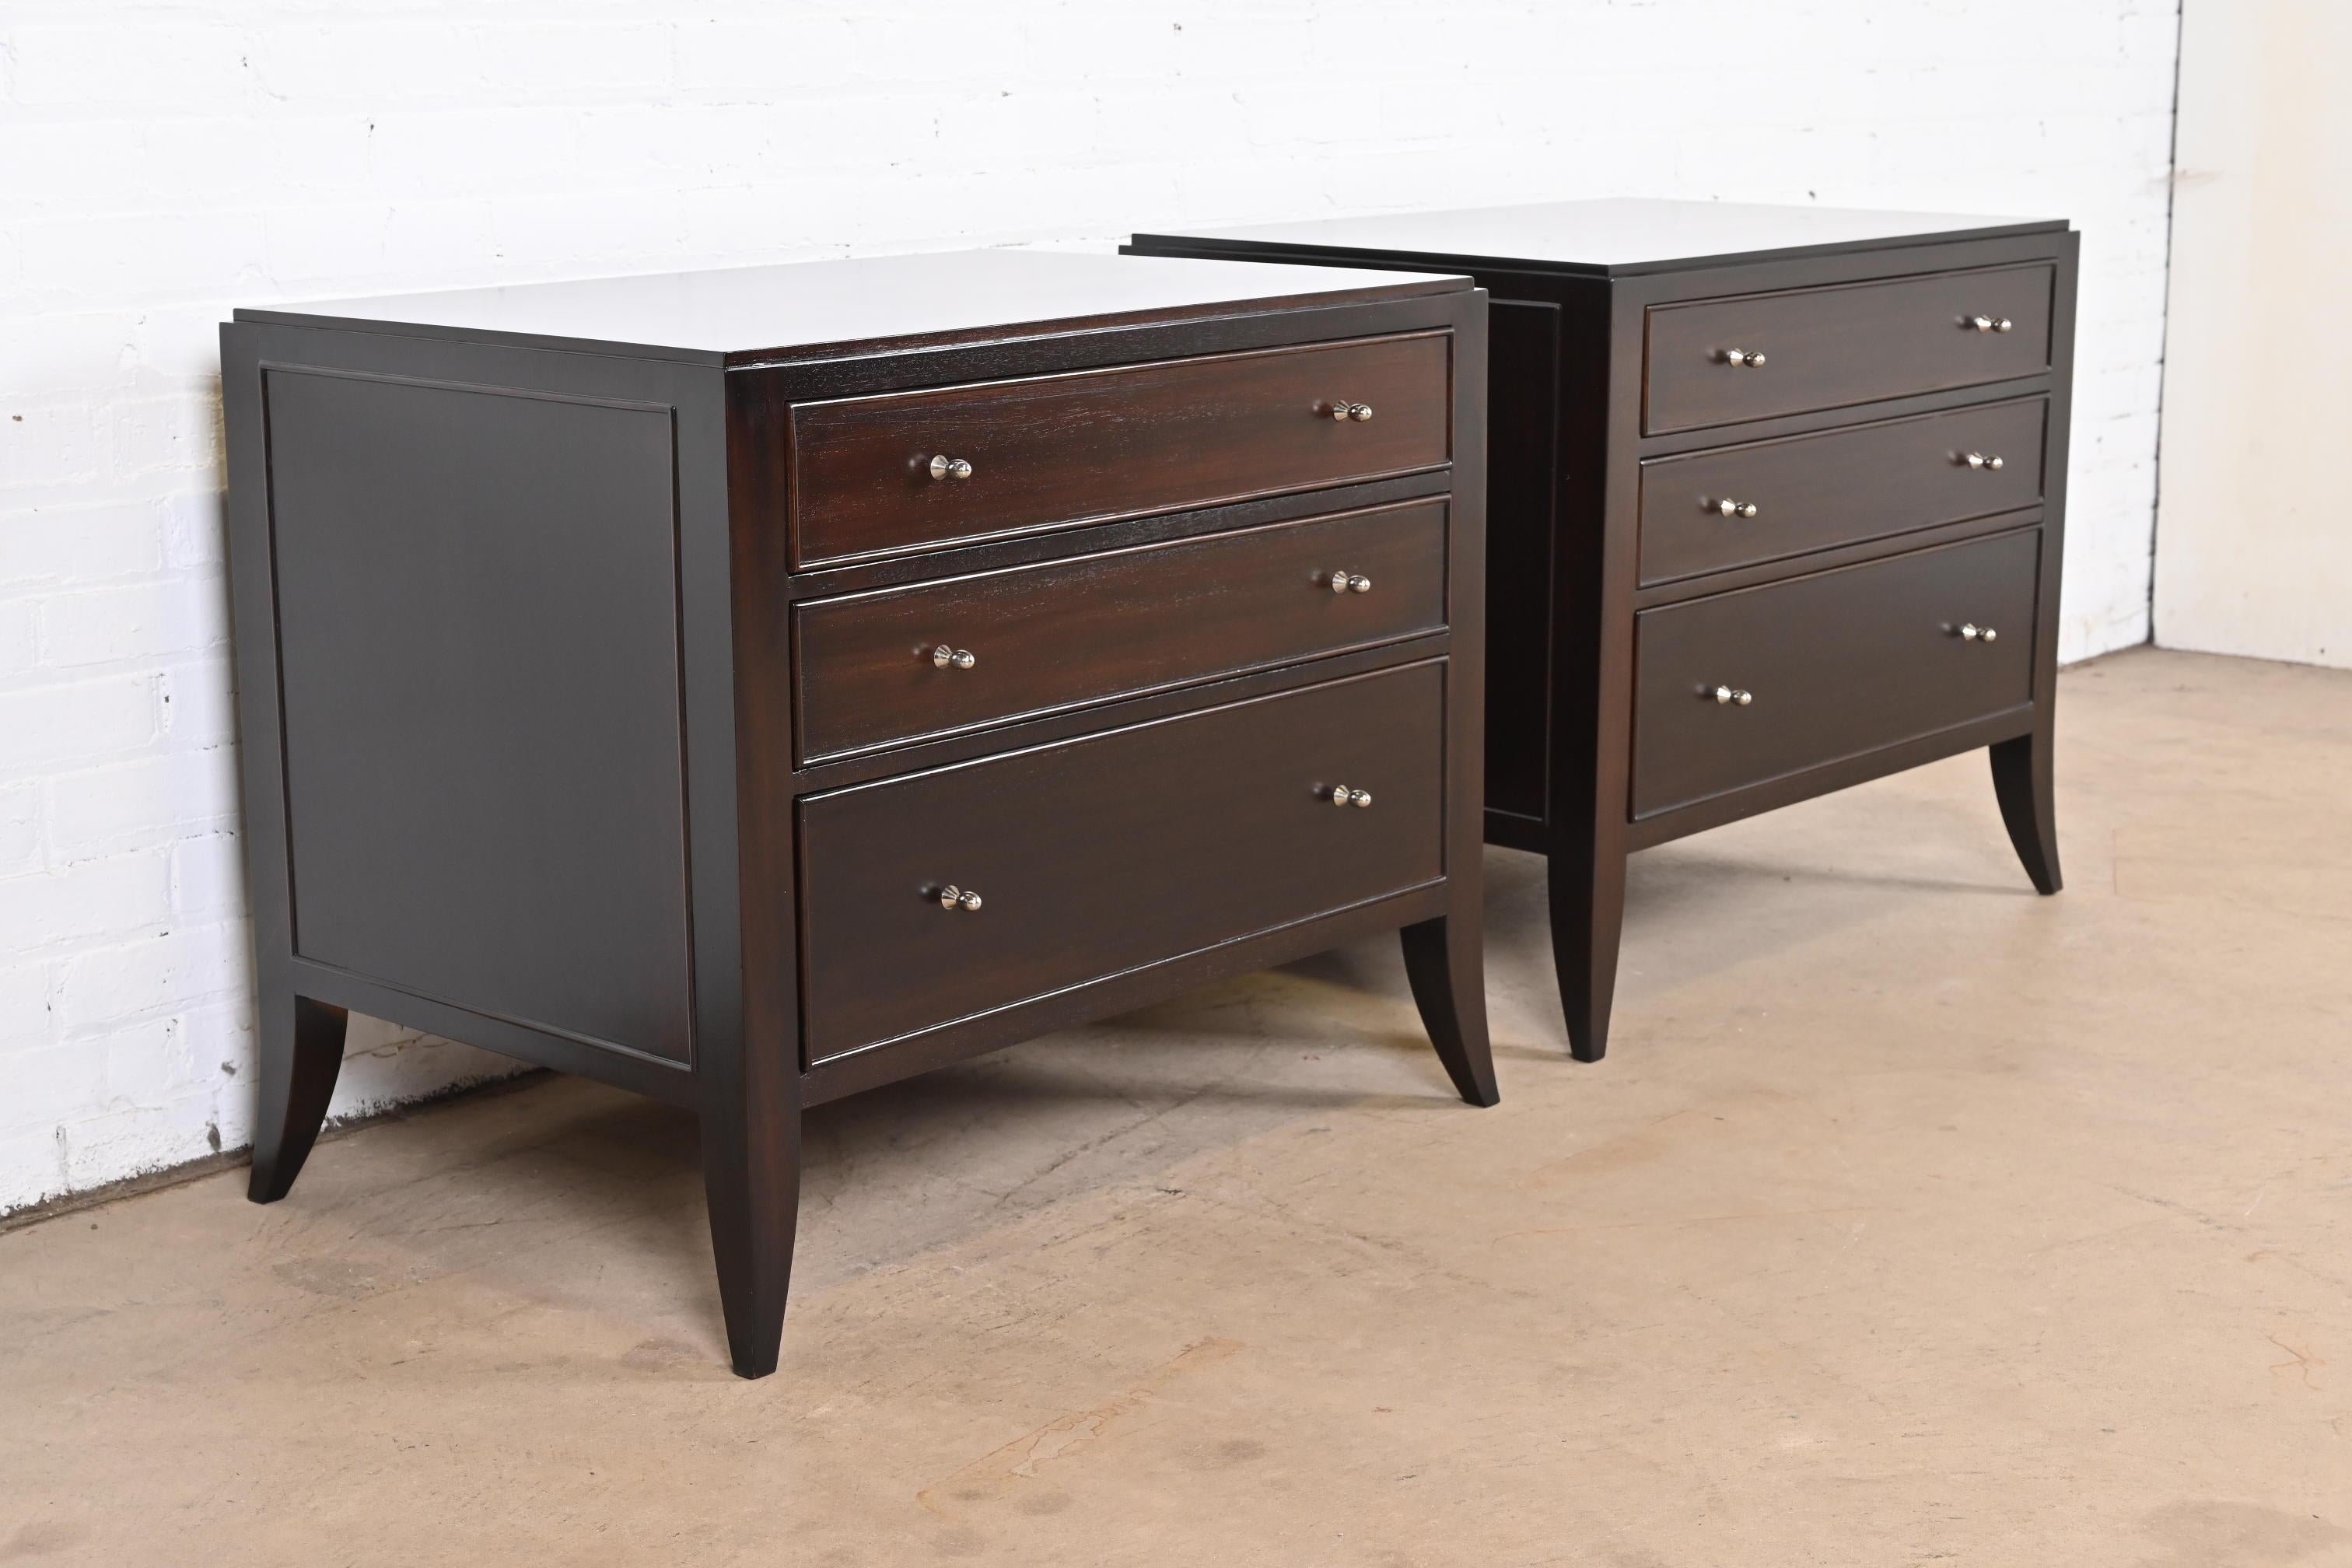 Nickel Barbara Barry for Baker Furniture Dark Mahogany Bedside Chests, Newly Refinished